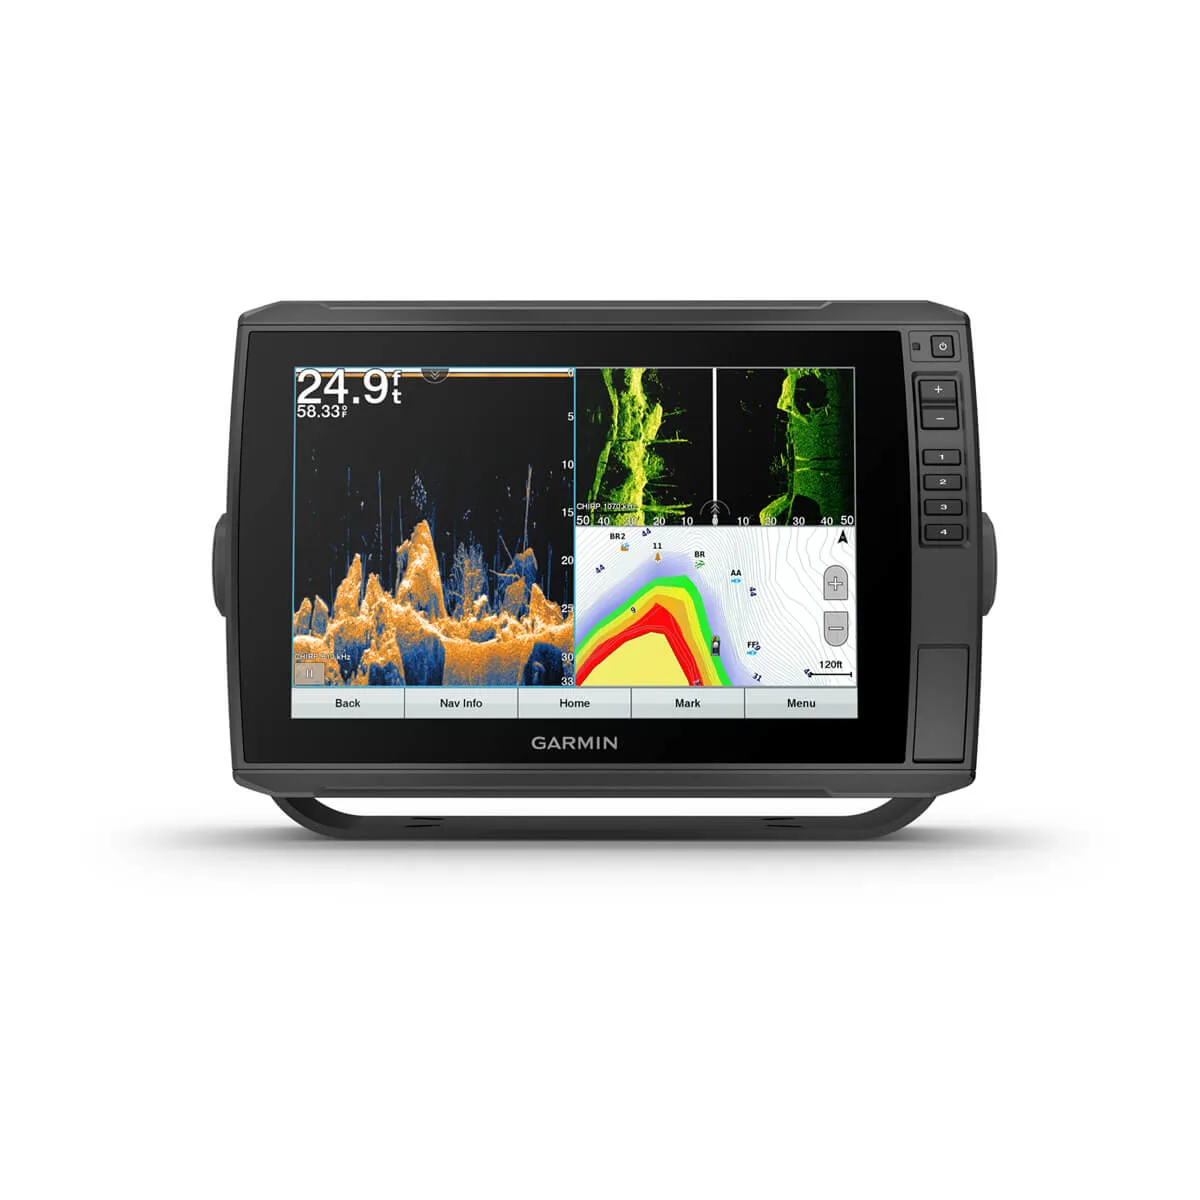 The Garmin ECHOMAP Ultra 106sv with GT56UHD GN+ sunlight-readable 10” touchscreen combo features preloaded coastal and inland Garmin Navionics+™ mapping, and the transducer bundle adds CHIRP traditional and Ultra High-Definition scanning sonars.